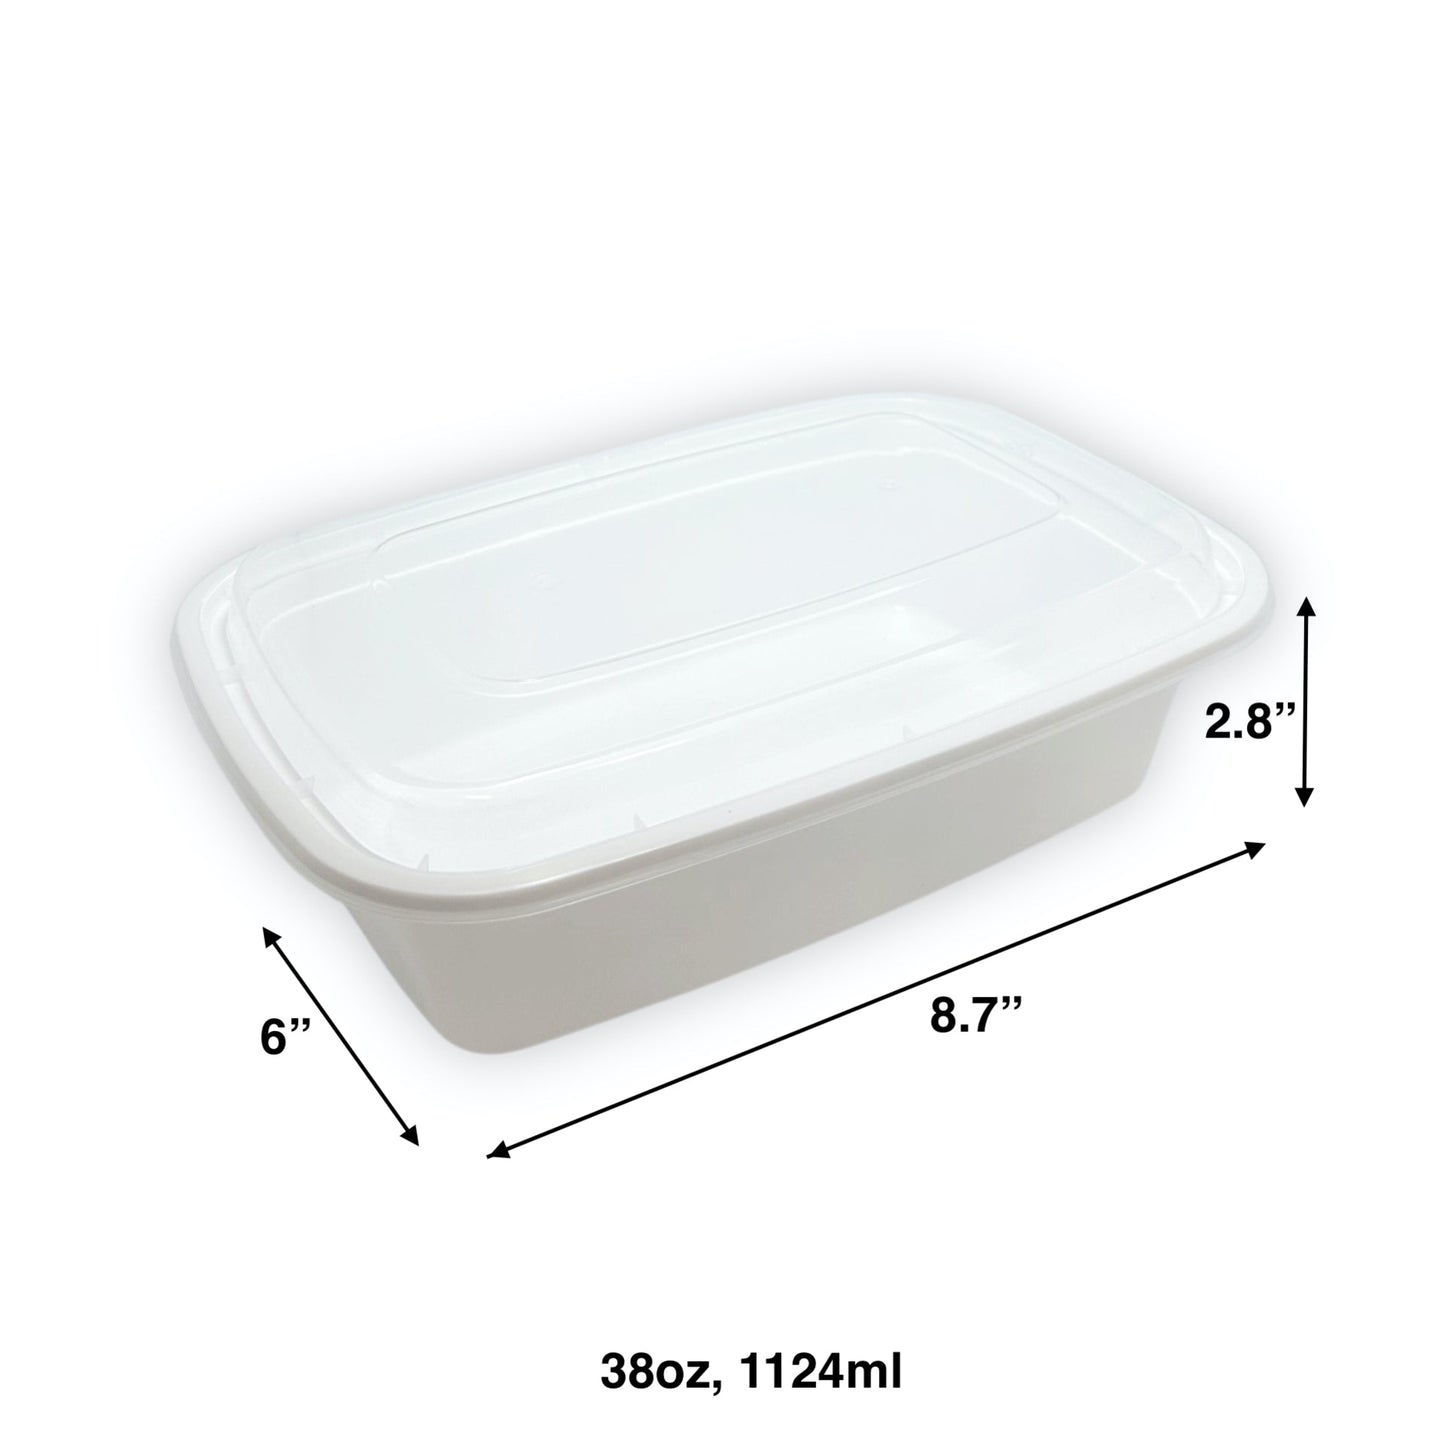 KIS-KY38G | 150sets 38oz, 1124ml White PP Rectangle Container with Clear Lids Combo; $0.198/set